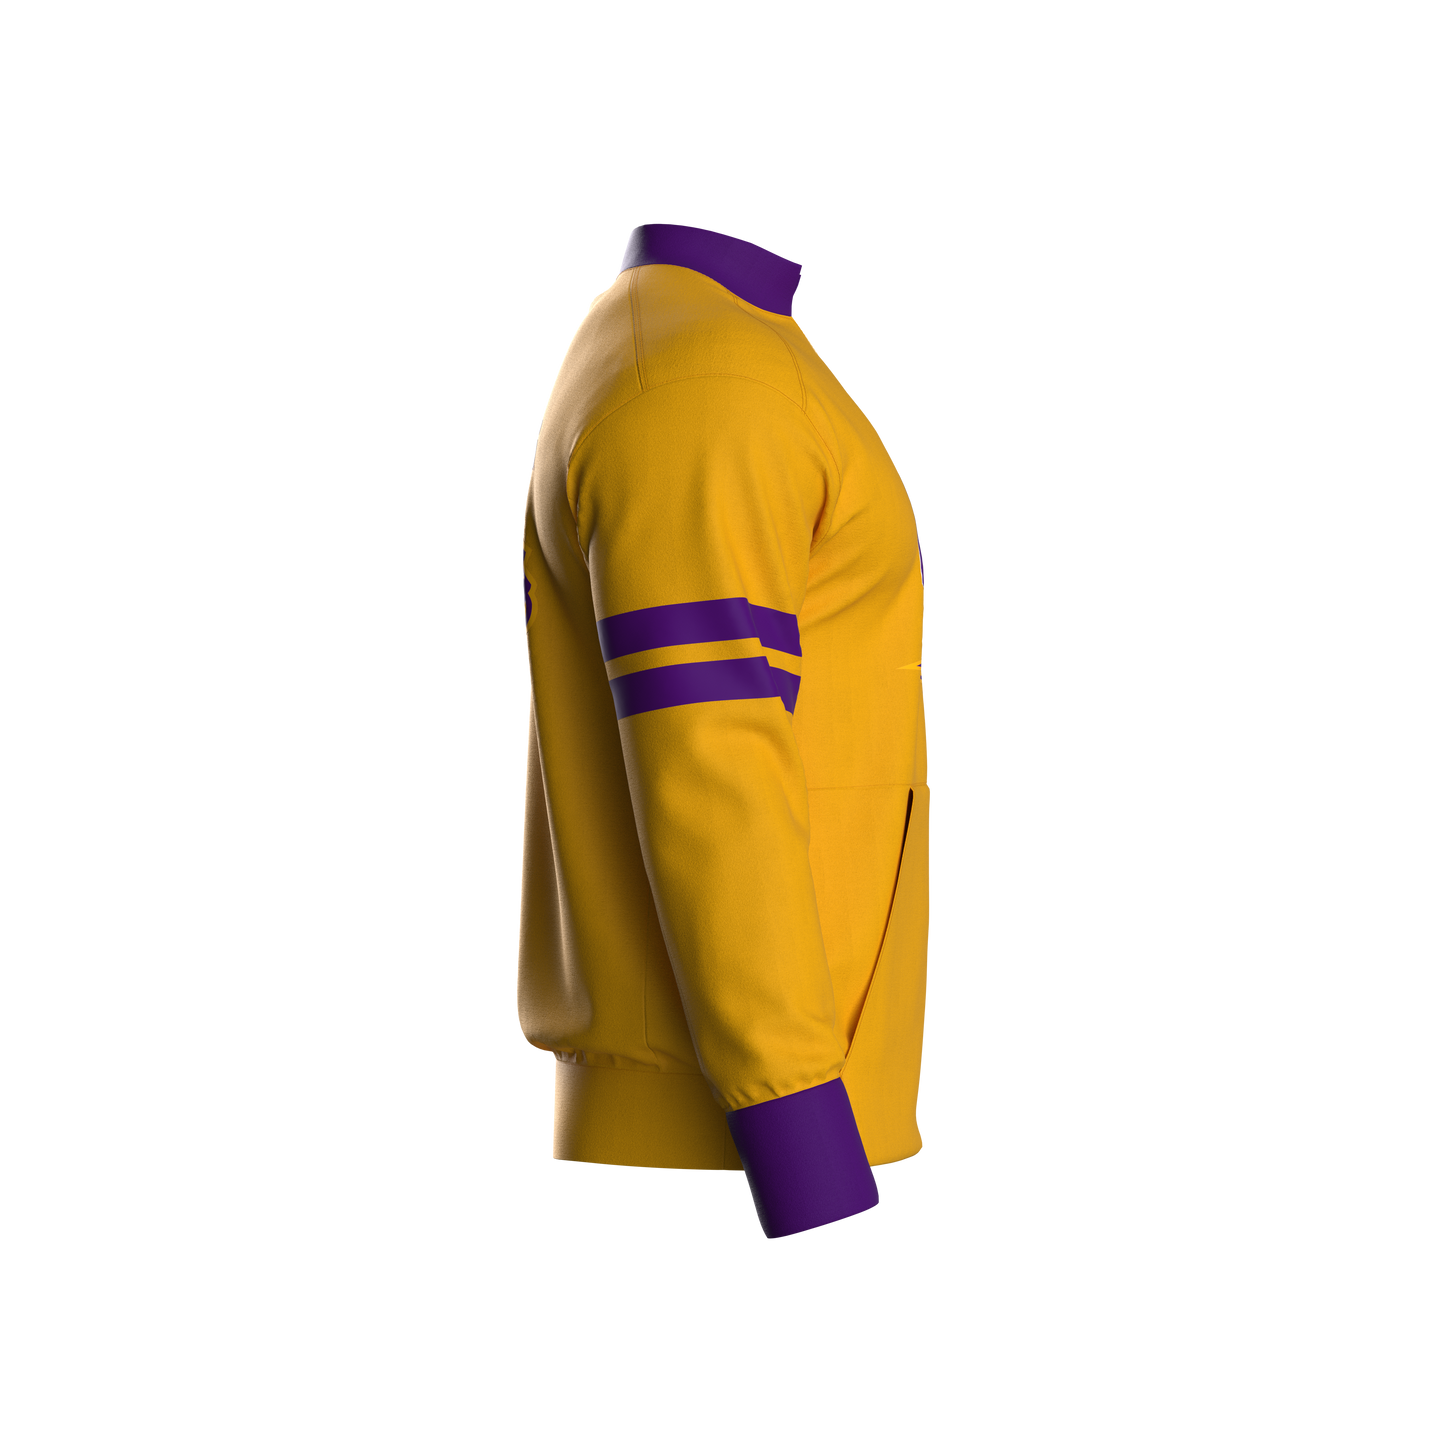 Northern Iowa University Away Pullover (youth)